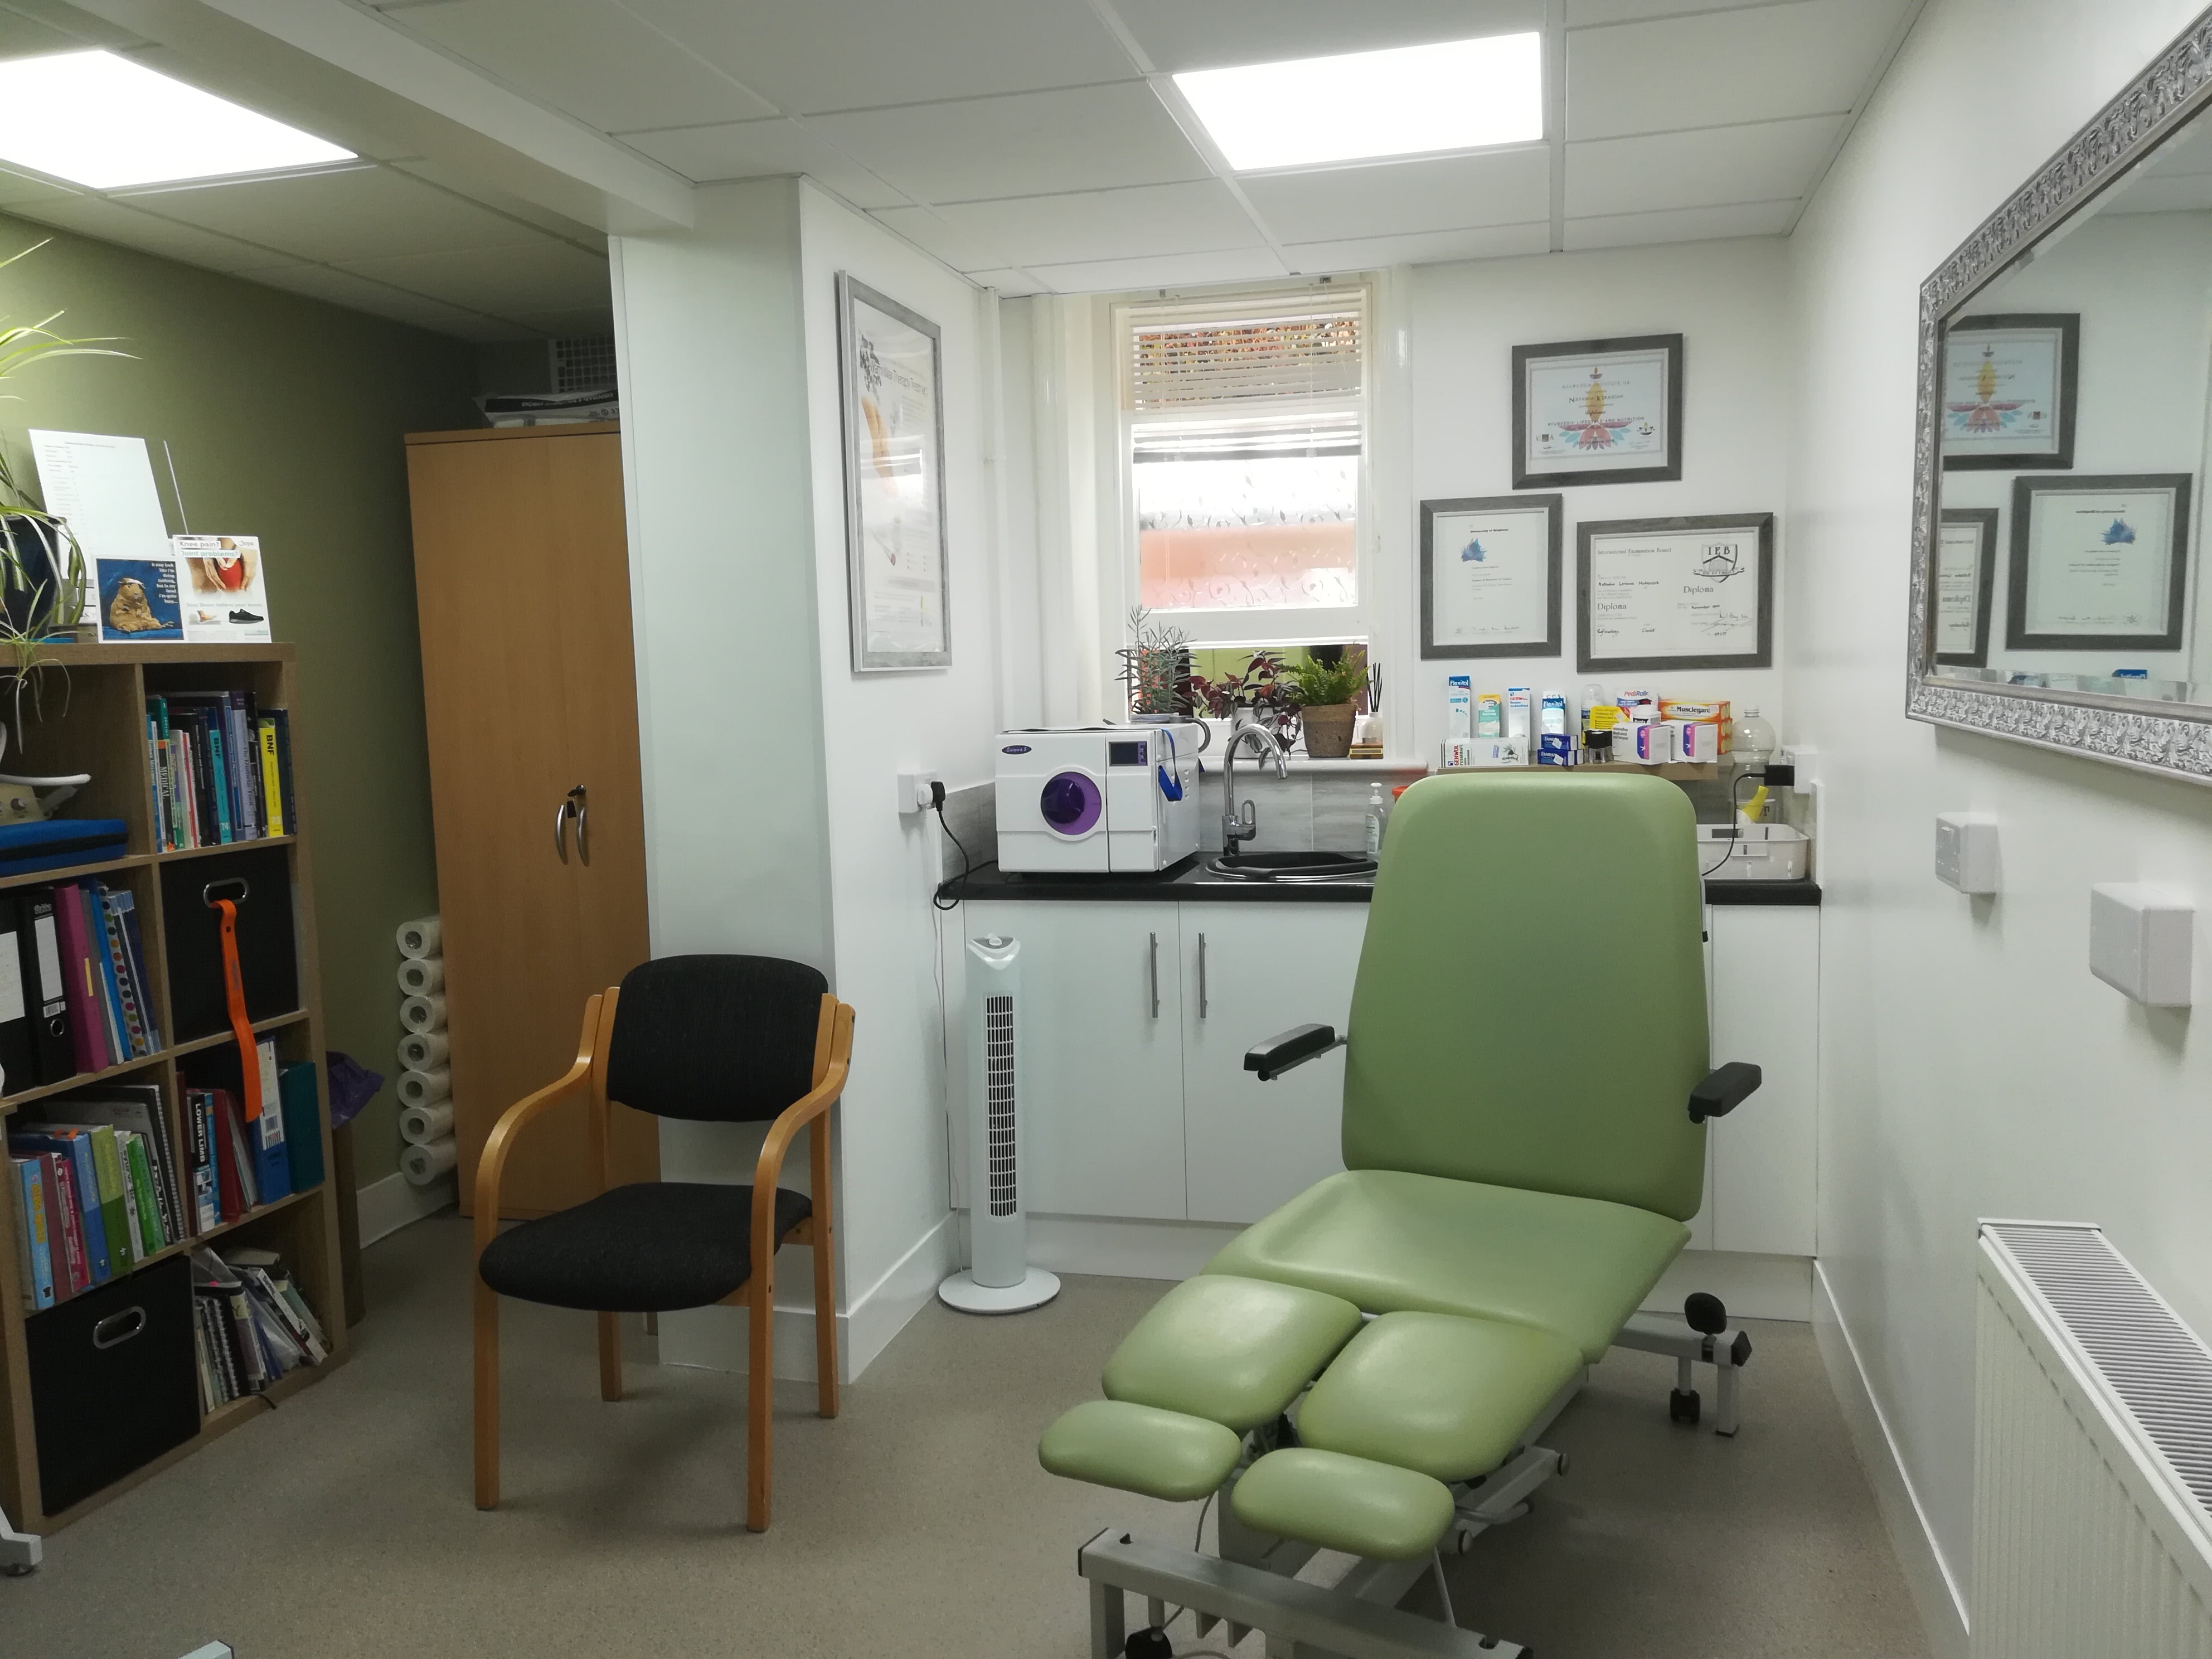 inside view of Earlsgate Podiatry clinic, showing a treatment chair in a brightly lit room